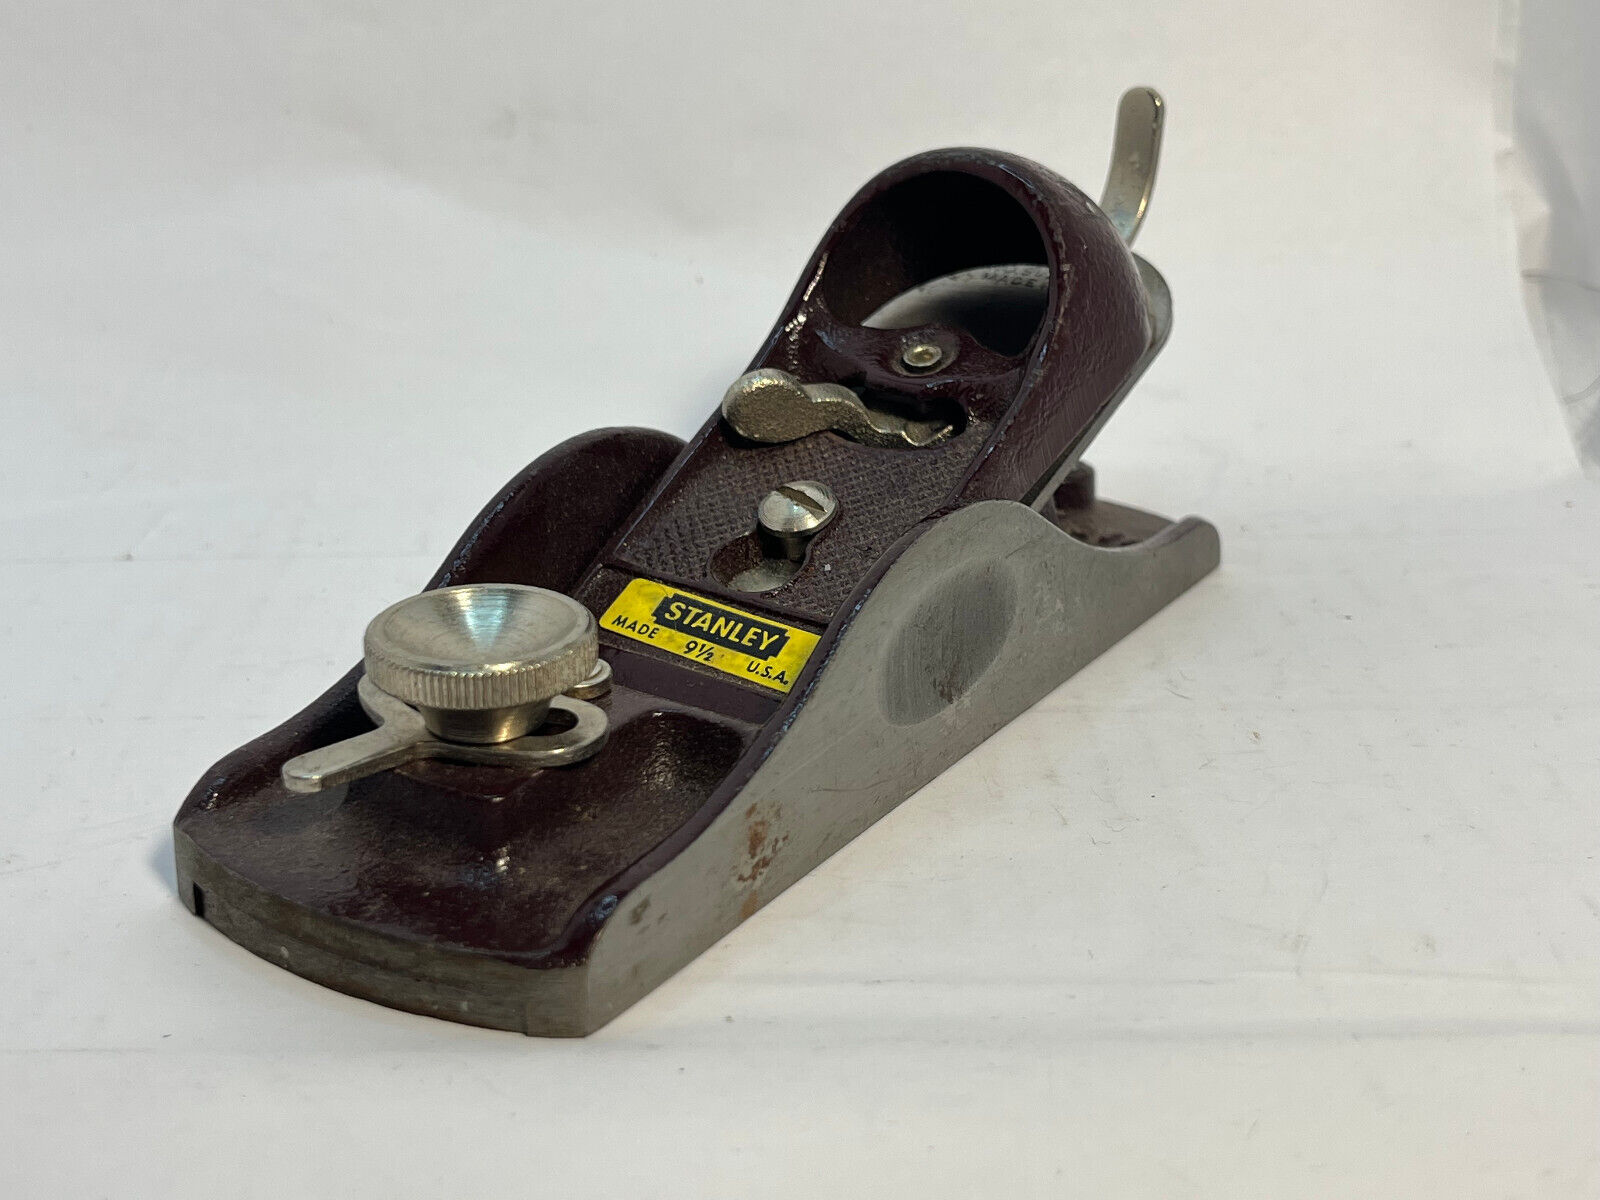 Vintage Stanley No. 9-1/2 Block Plane W/ Adjustable Throat Made In USA